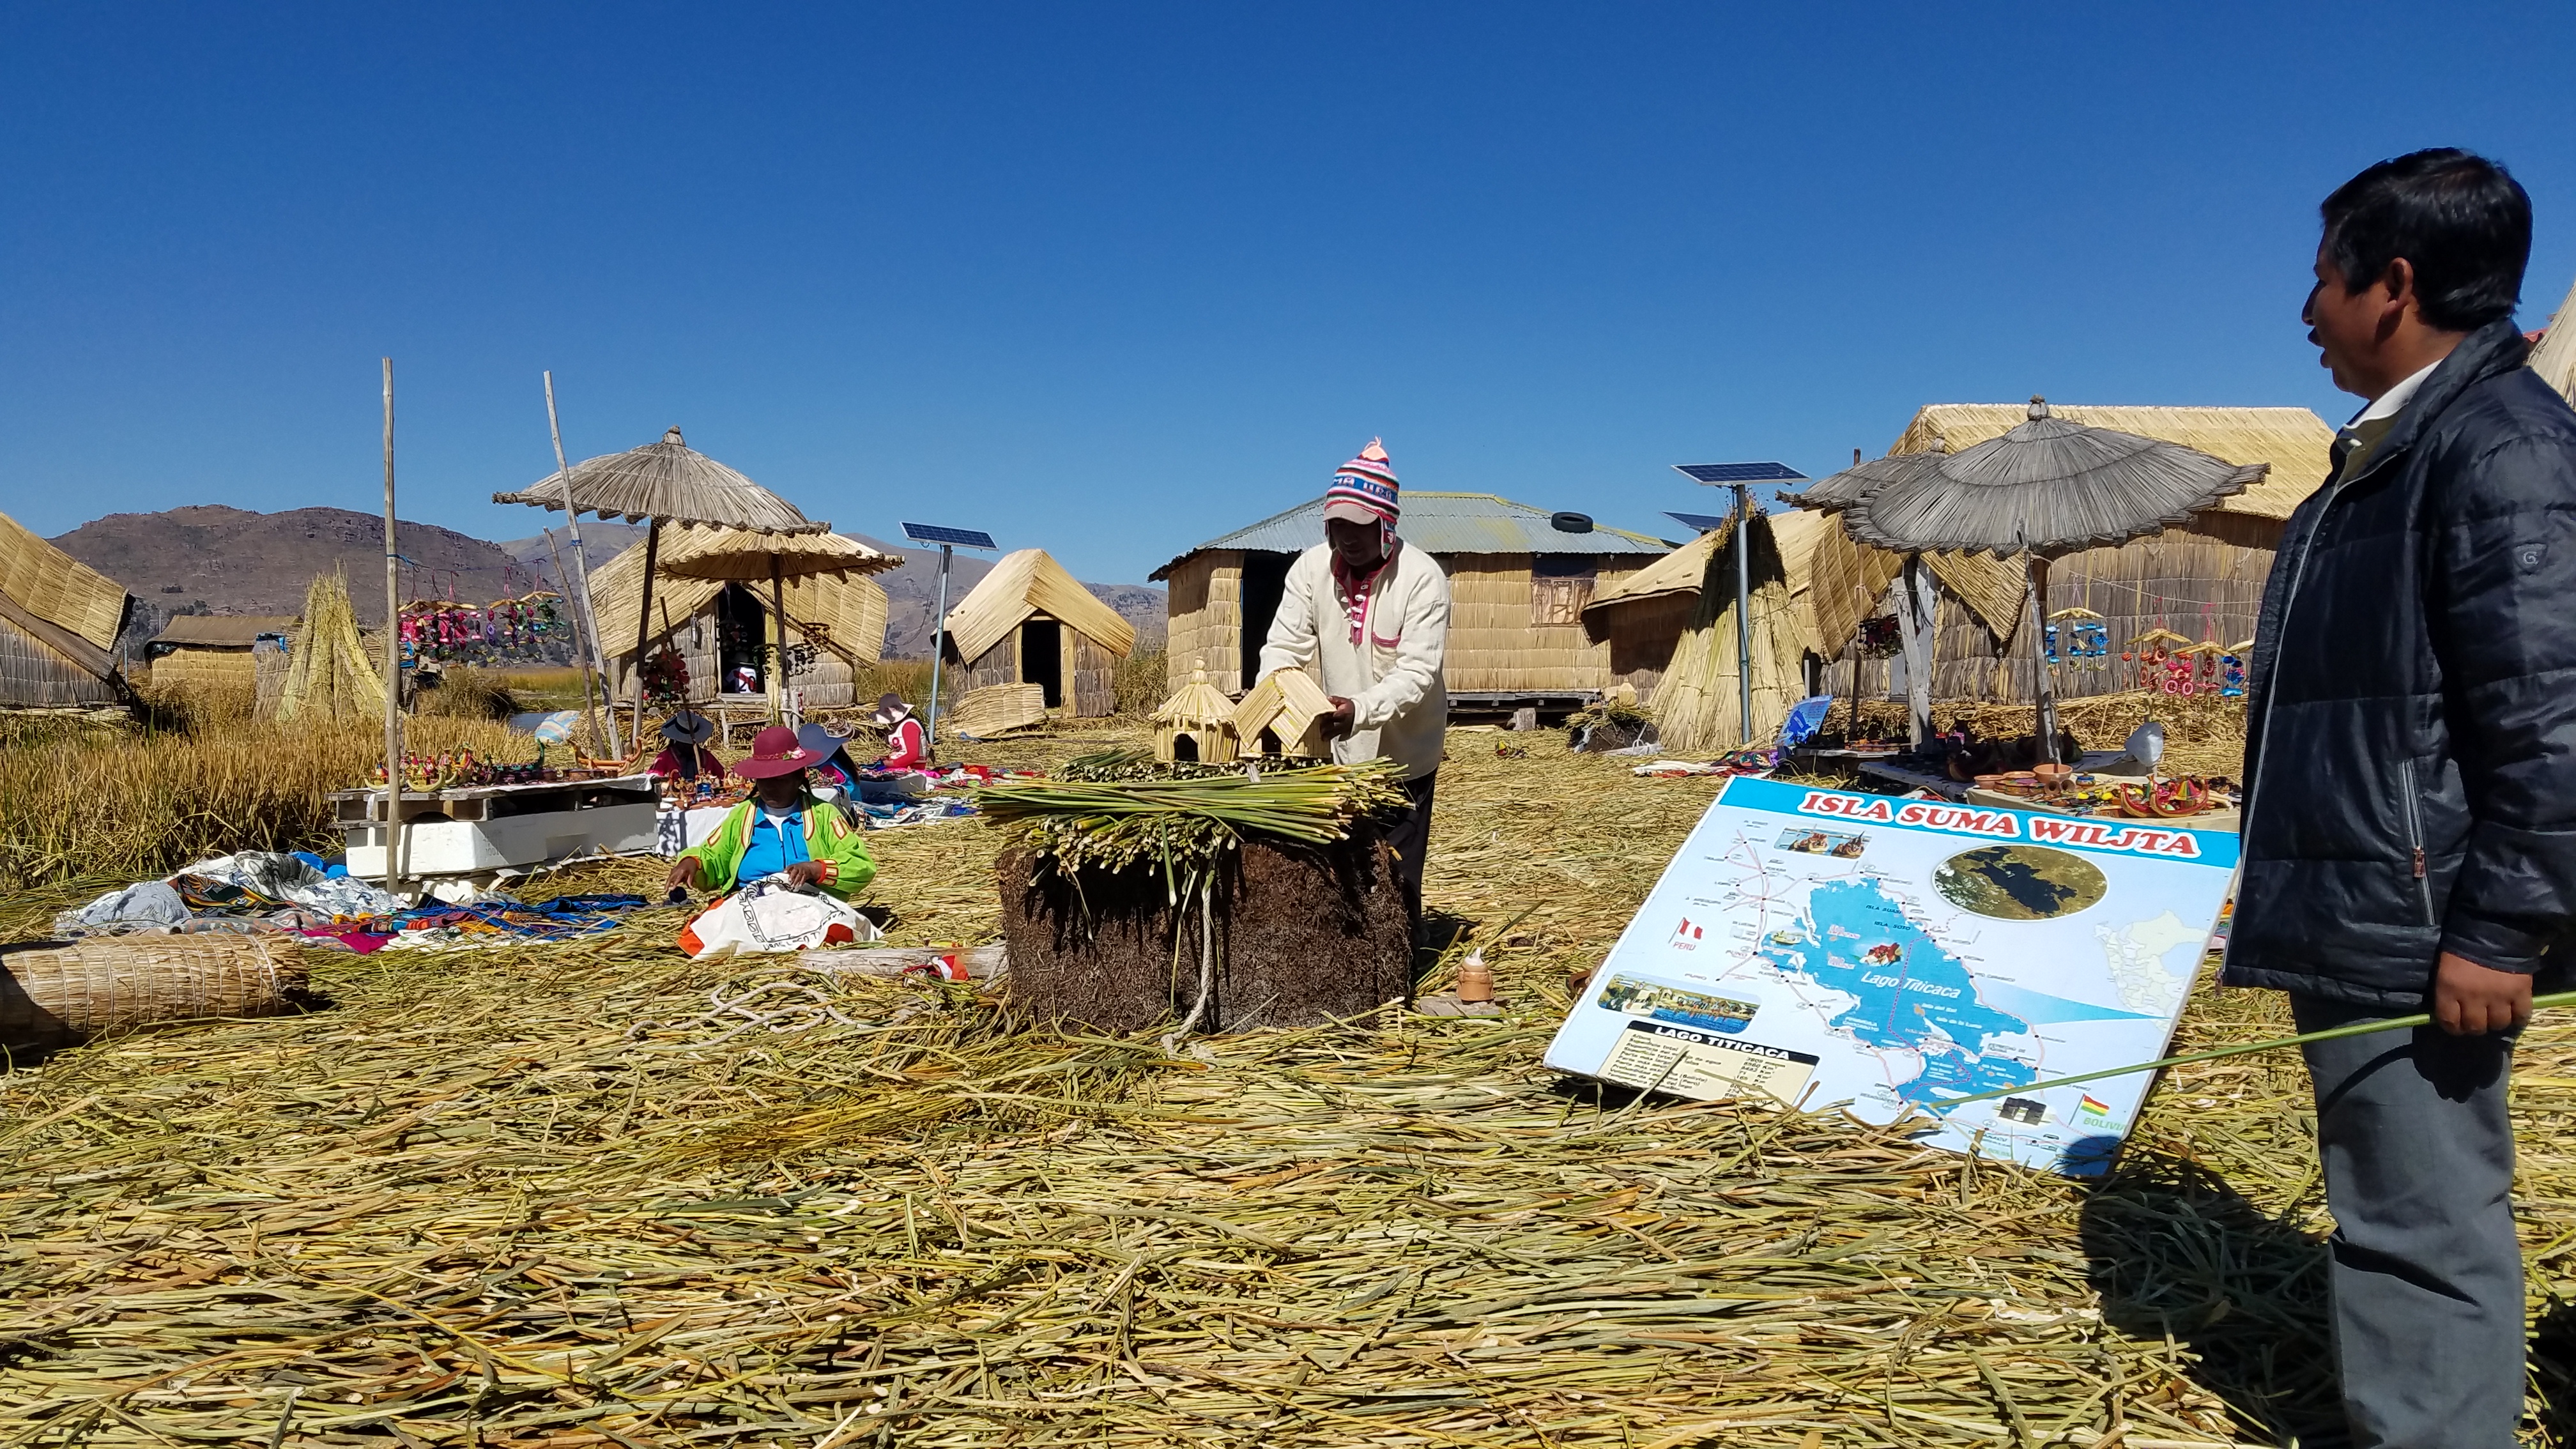 A Uros man in a hat and striped shirt working on a field with straw huts and a map.